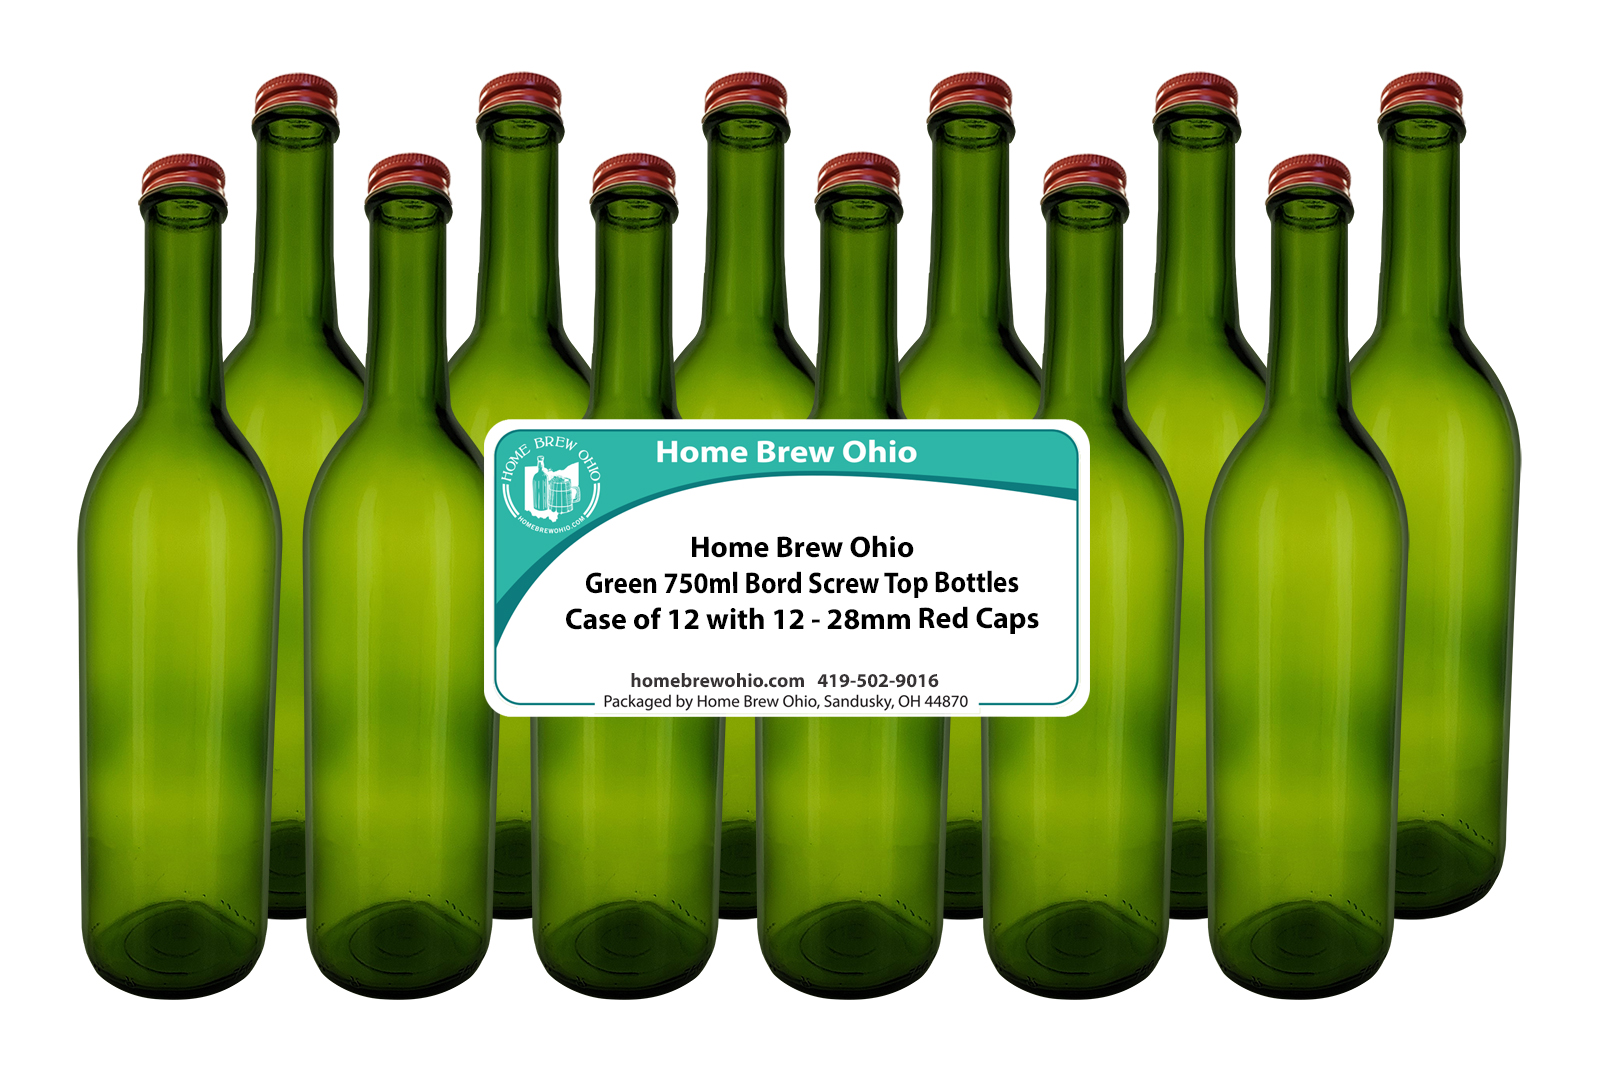 HOME BREW OHIO HOMEBREWOHIO.COM 750 ml Green Bordeaux Bottles, Screw Top, Case of 12 With 28mm Red Metal Lids